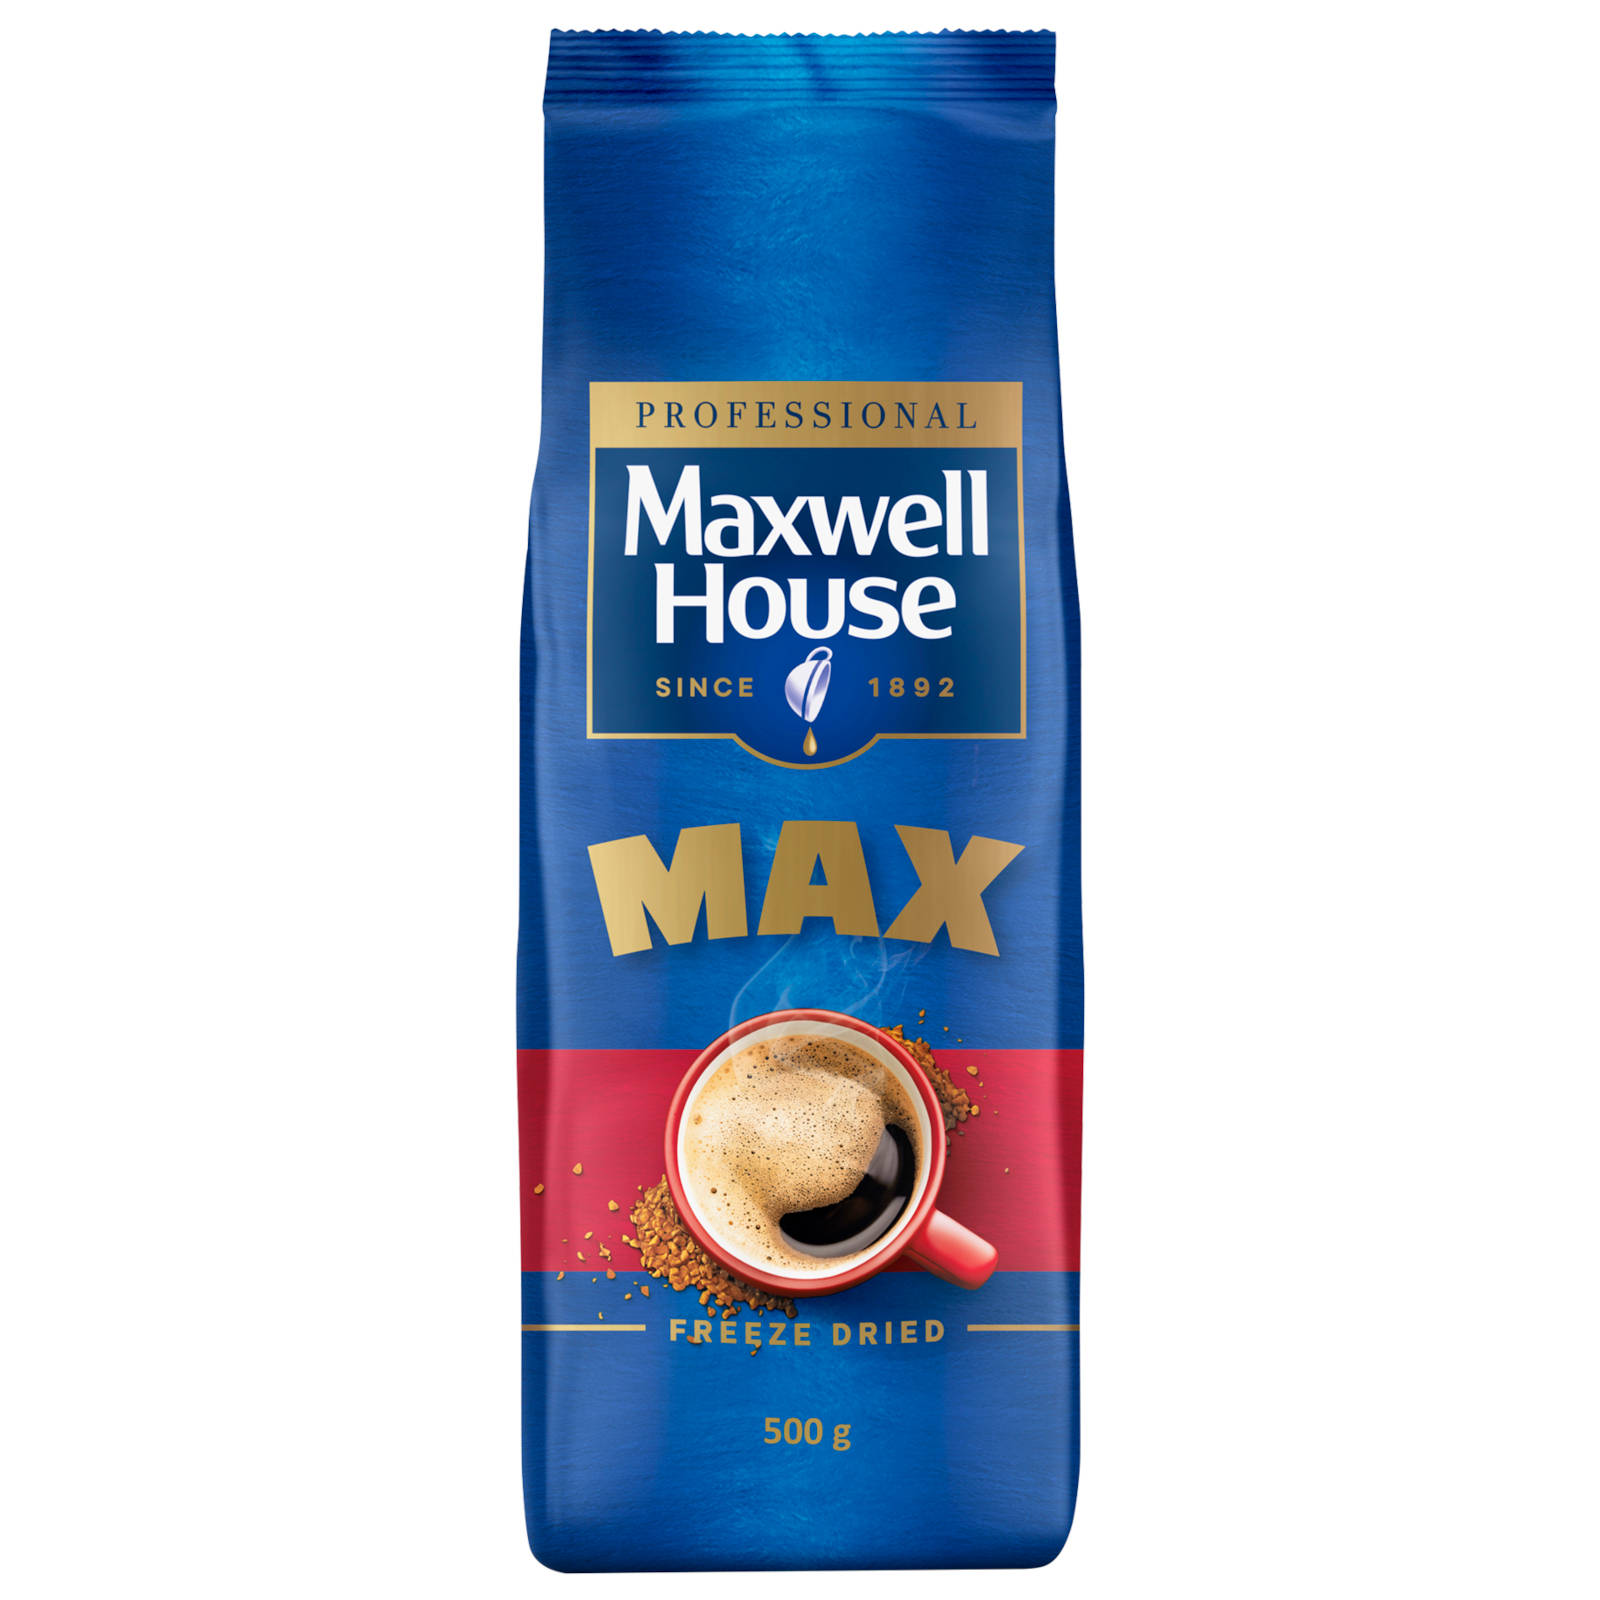 JACOBS MAXWELL HOUSE Instantkaffee MAX